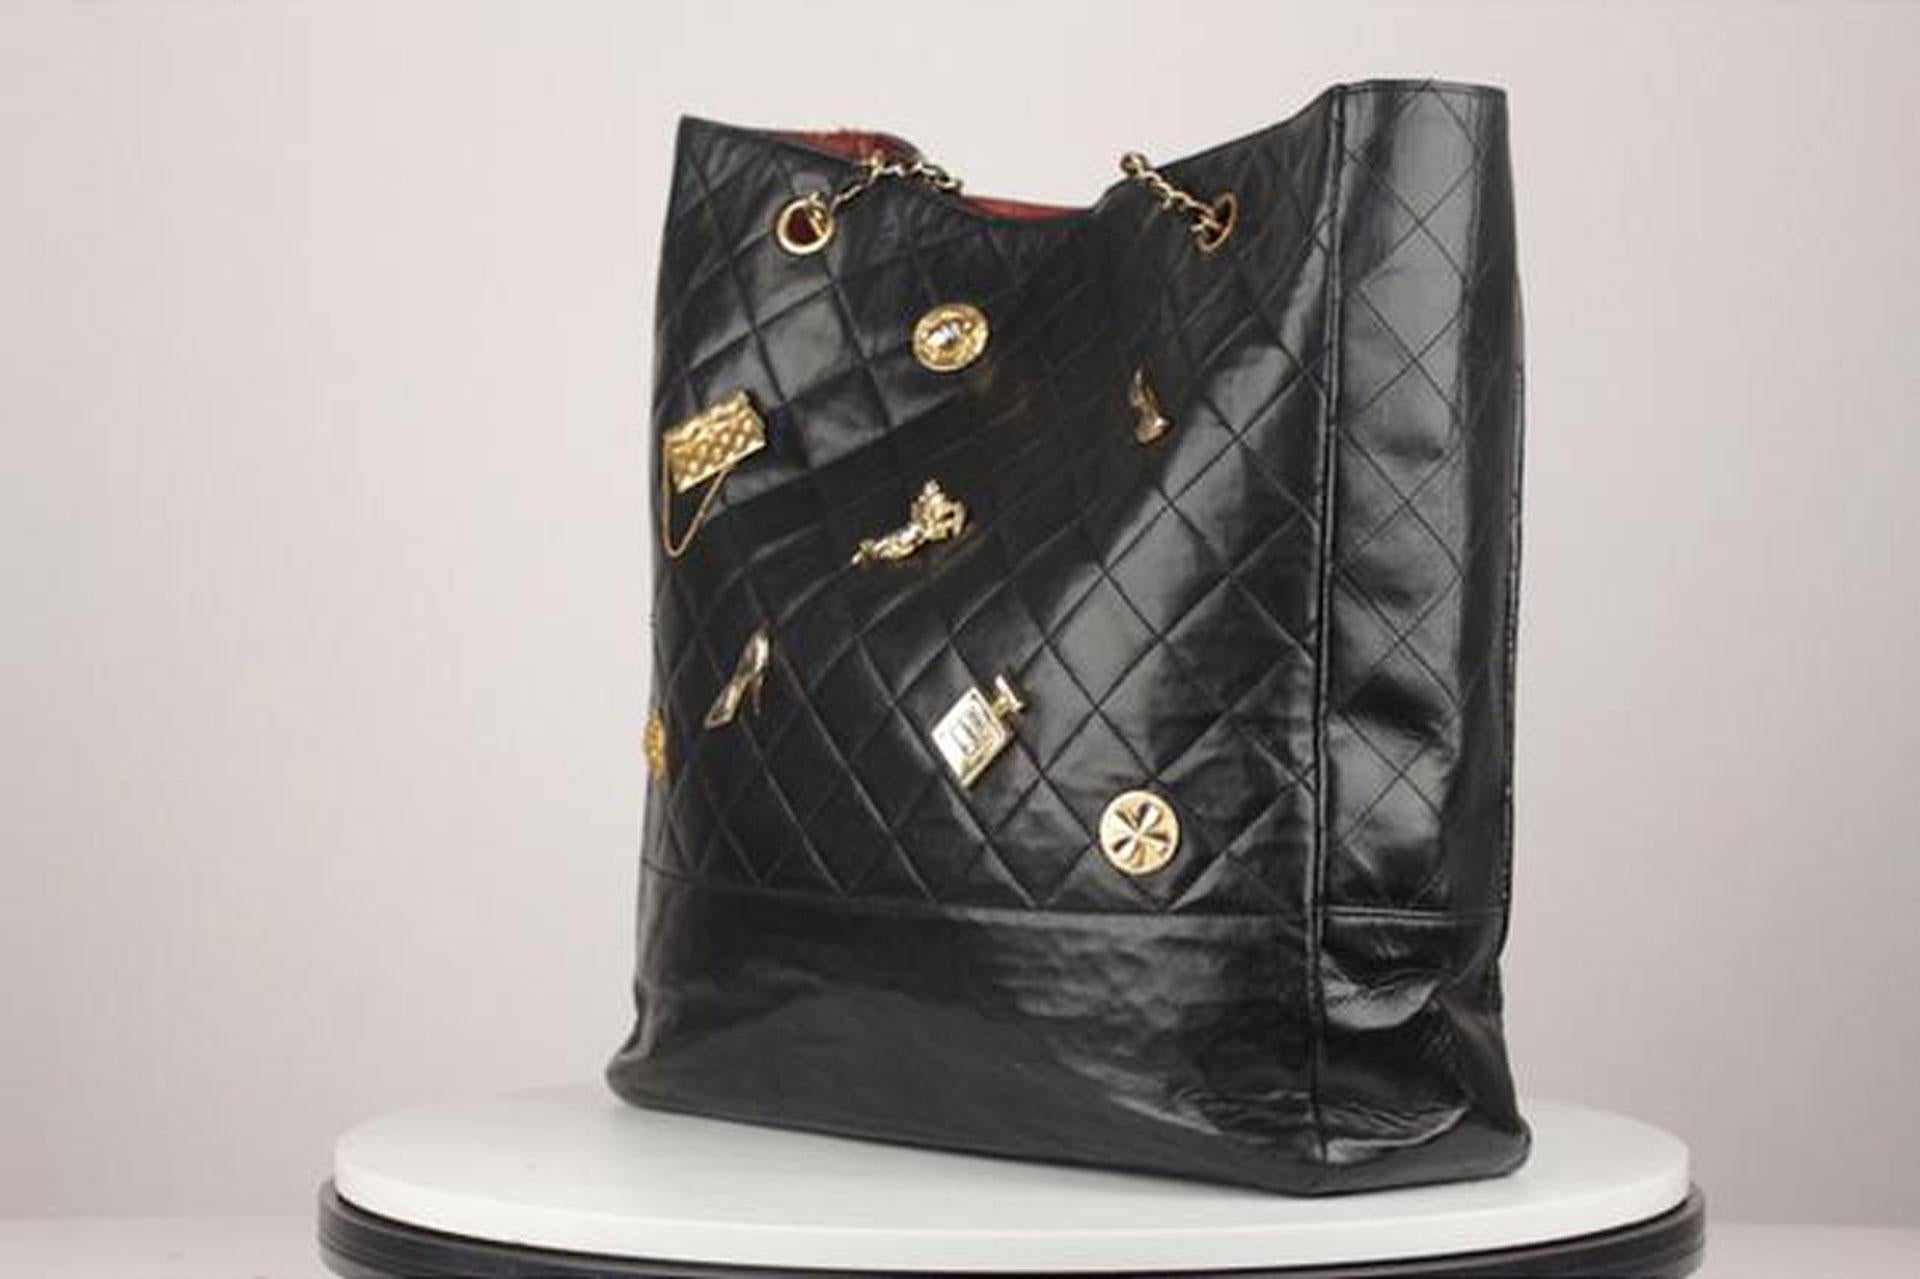 Chanel Timeless Bag Rare Vintage 1990's Limited Edition Lucky Charm Black Tote In Good Condition For Sale In Miami, FL